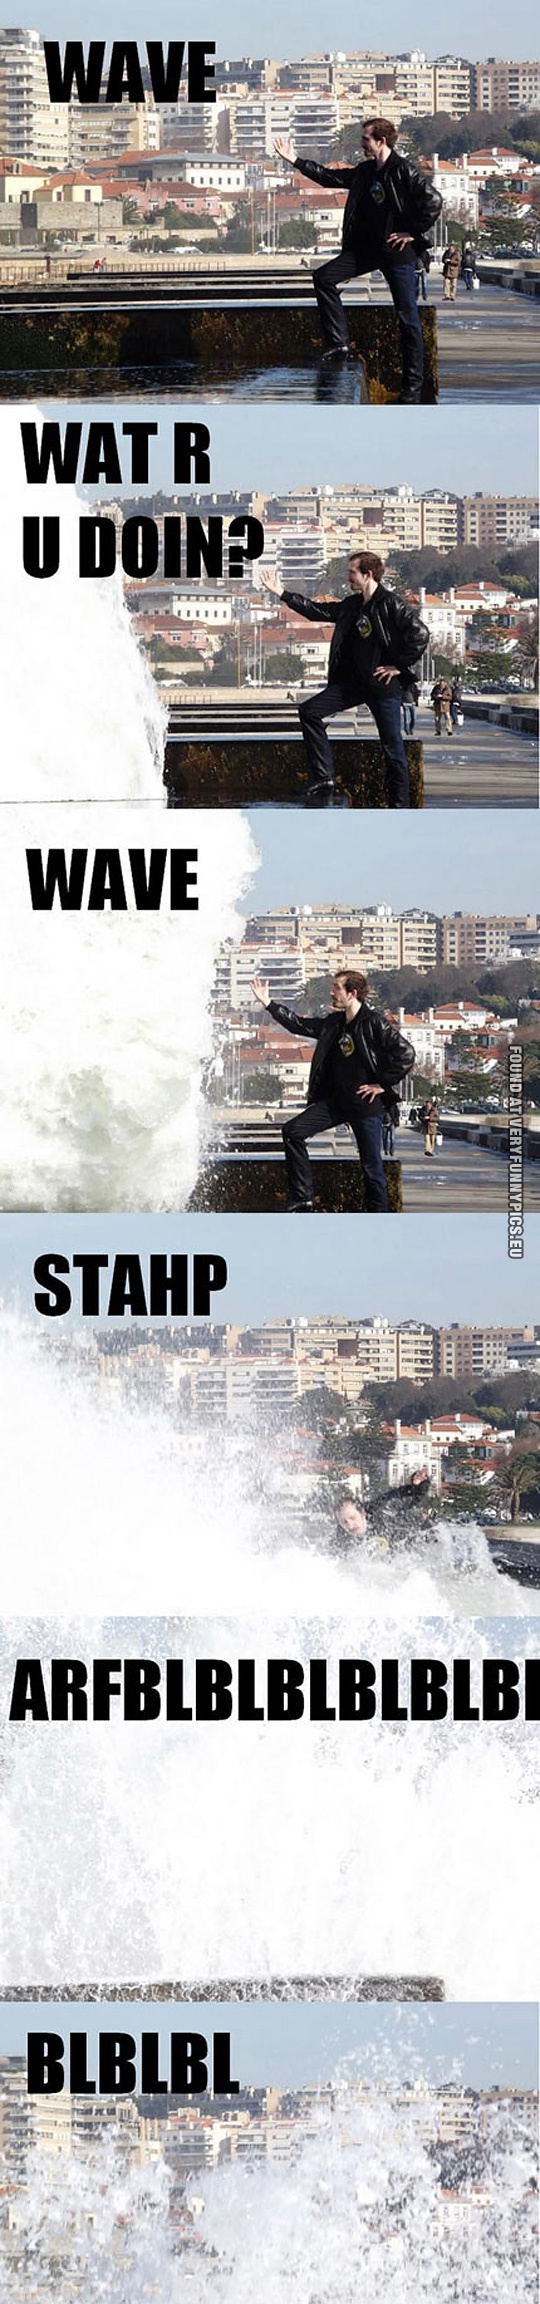 Funny Picture - Wave, What are you doing